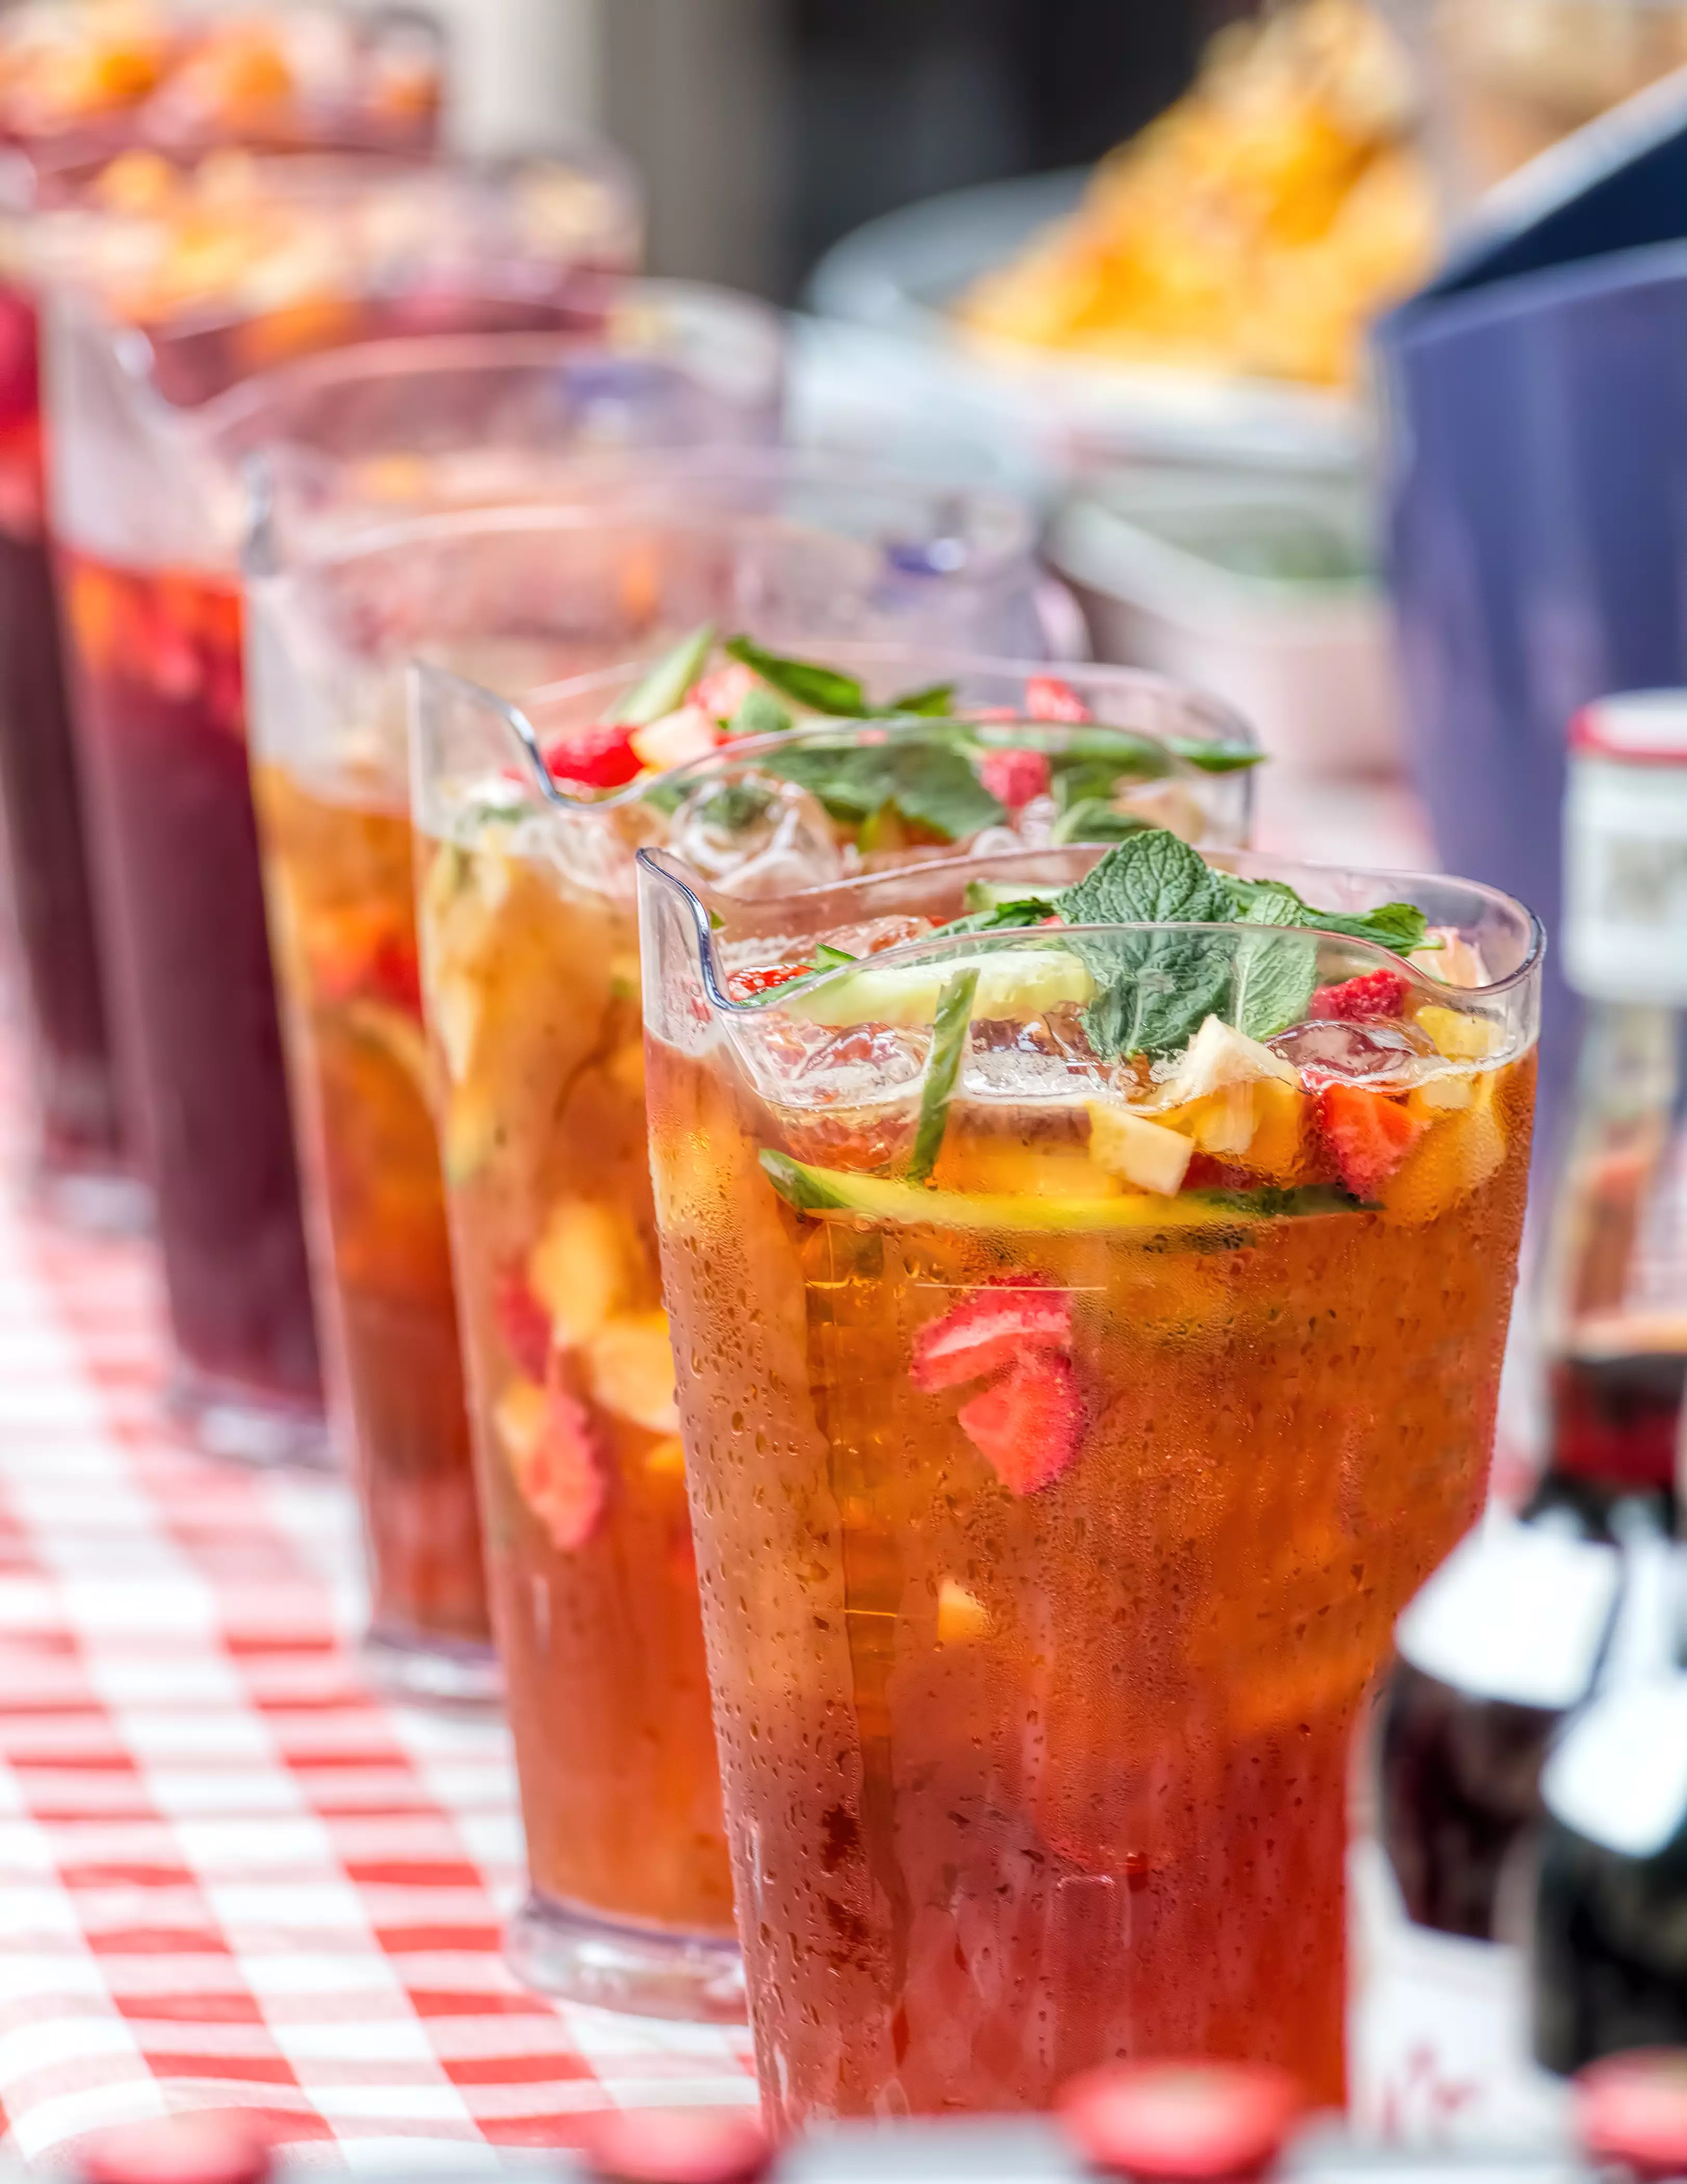 Pimm's is the ultimate summer tipple (